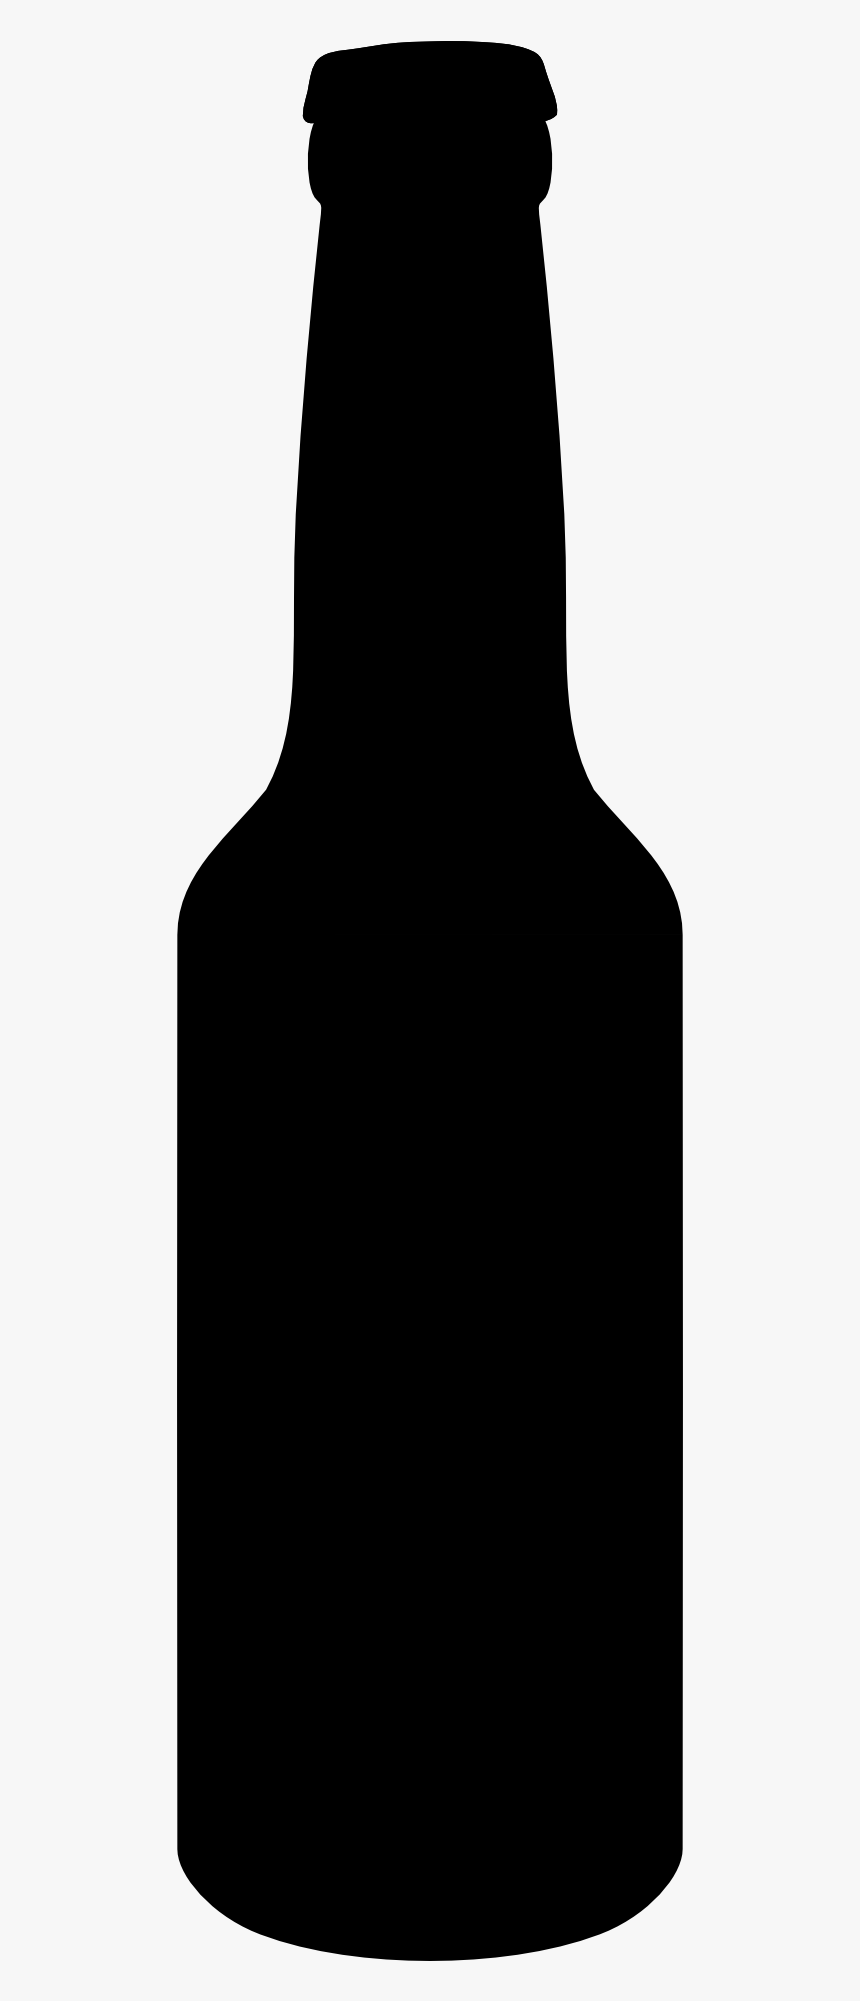 Beer Silhouette Png, Transparent Png, Free Download